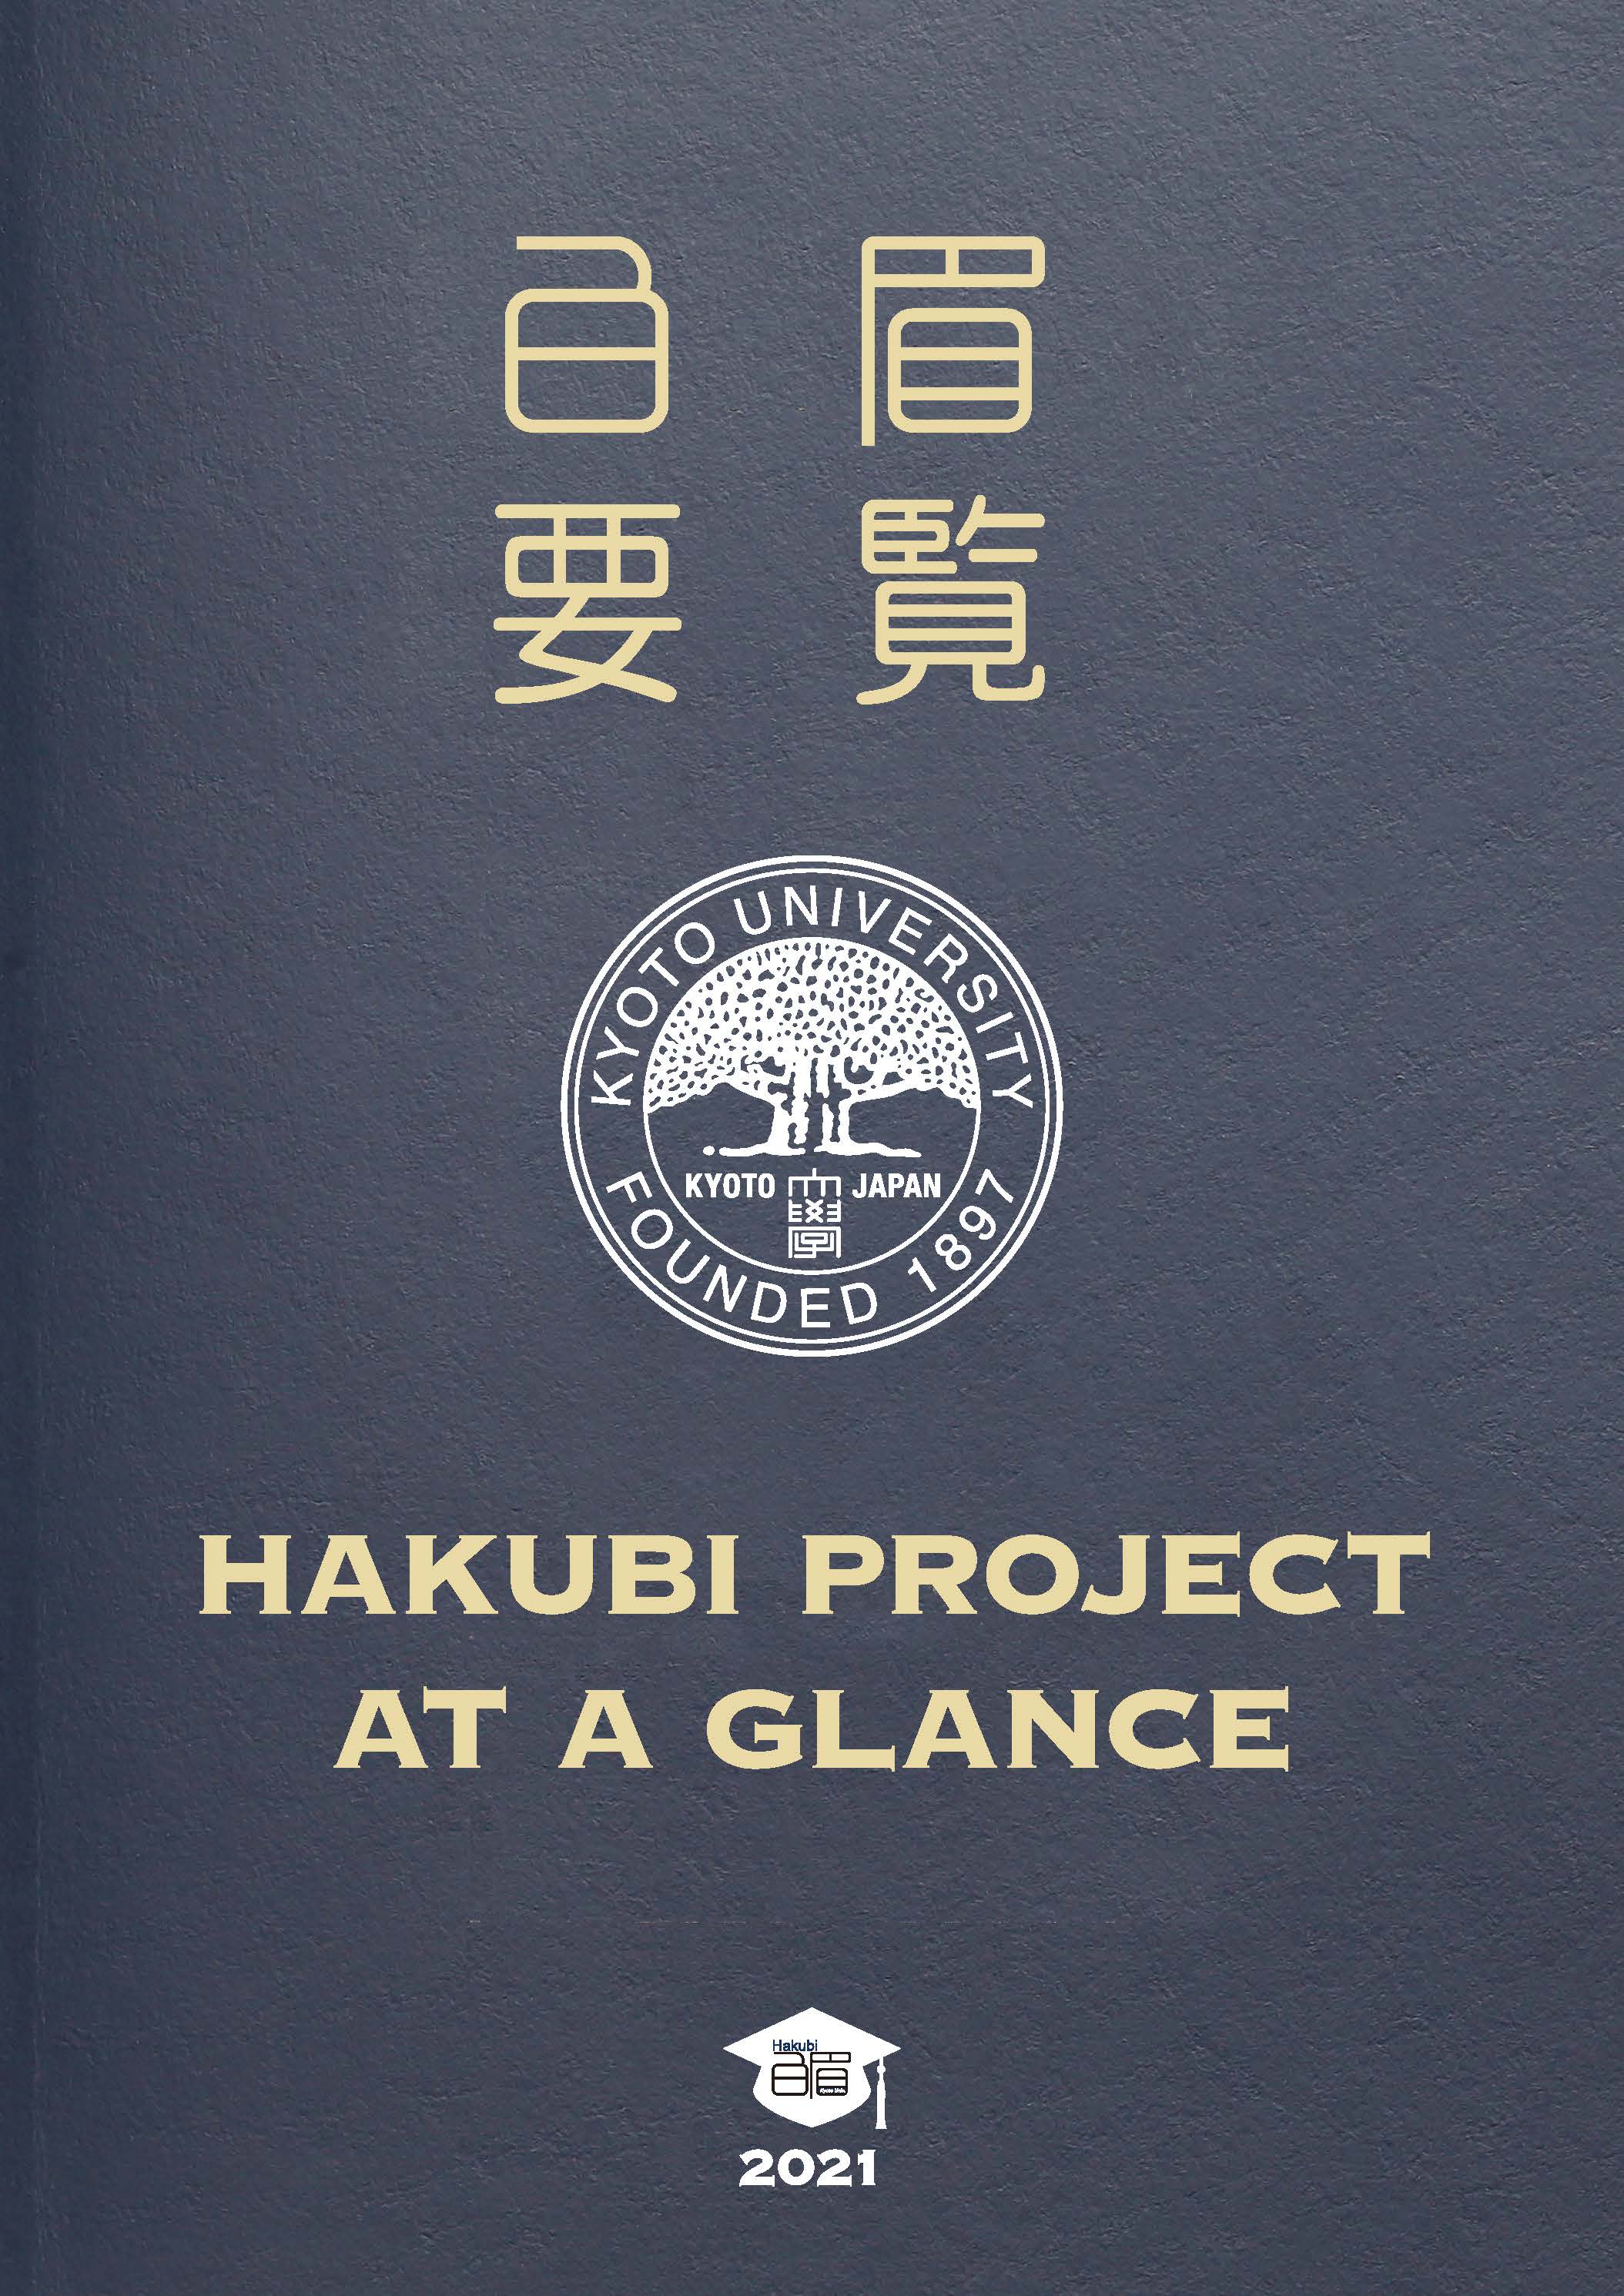 Fiscal year 2021 "The Hakubi Project at a Glance"(2022)